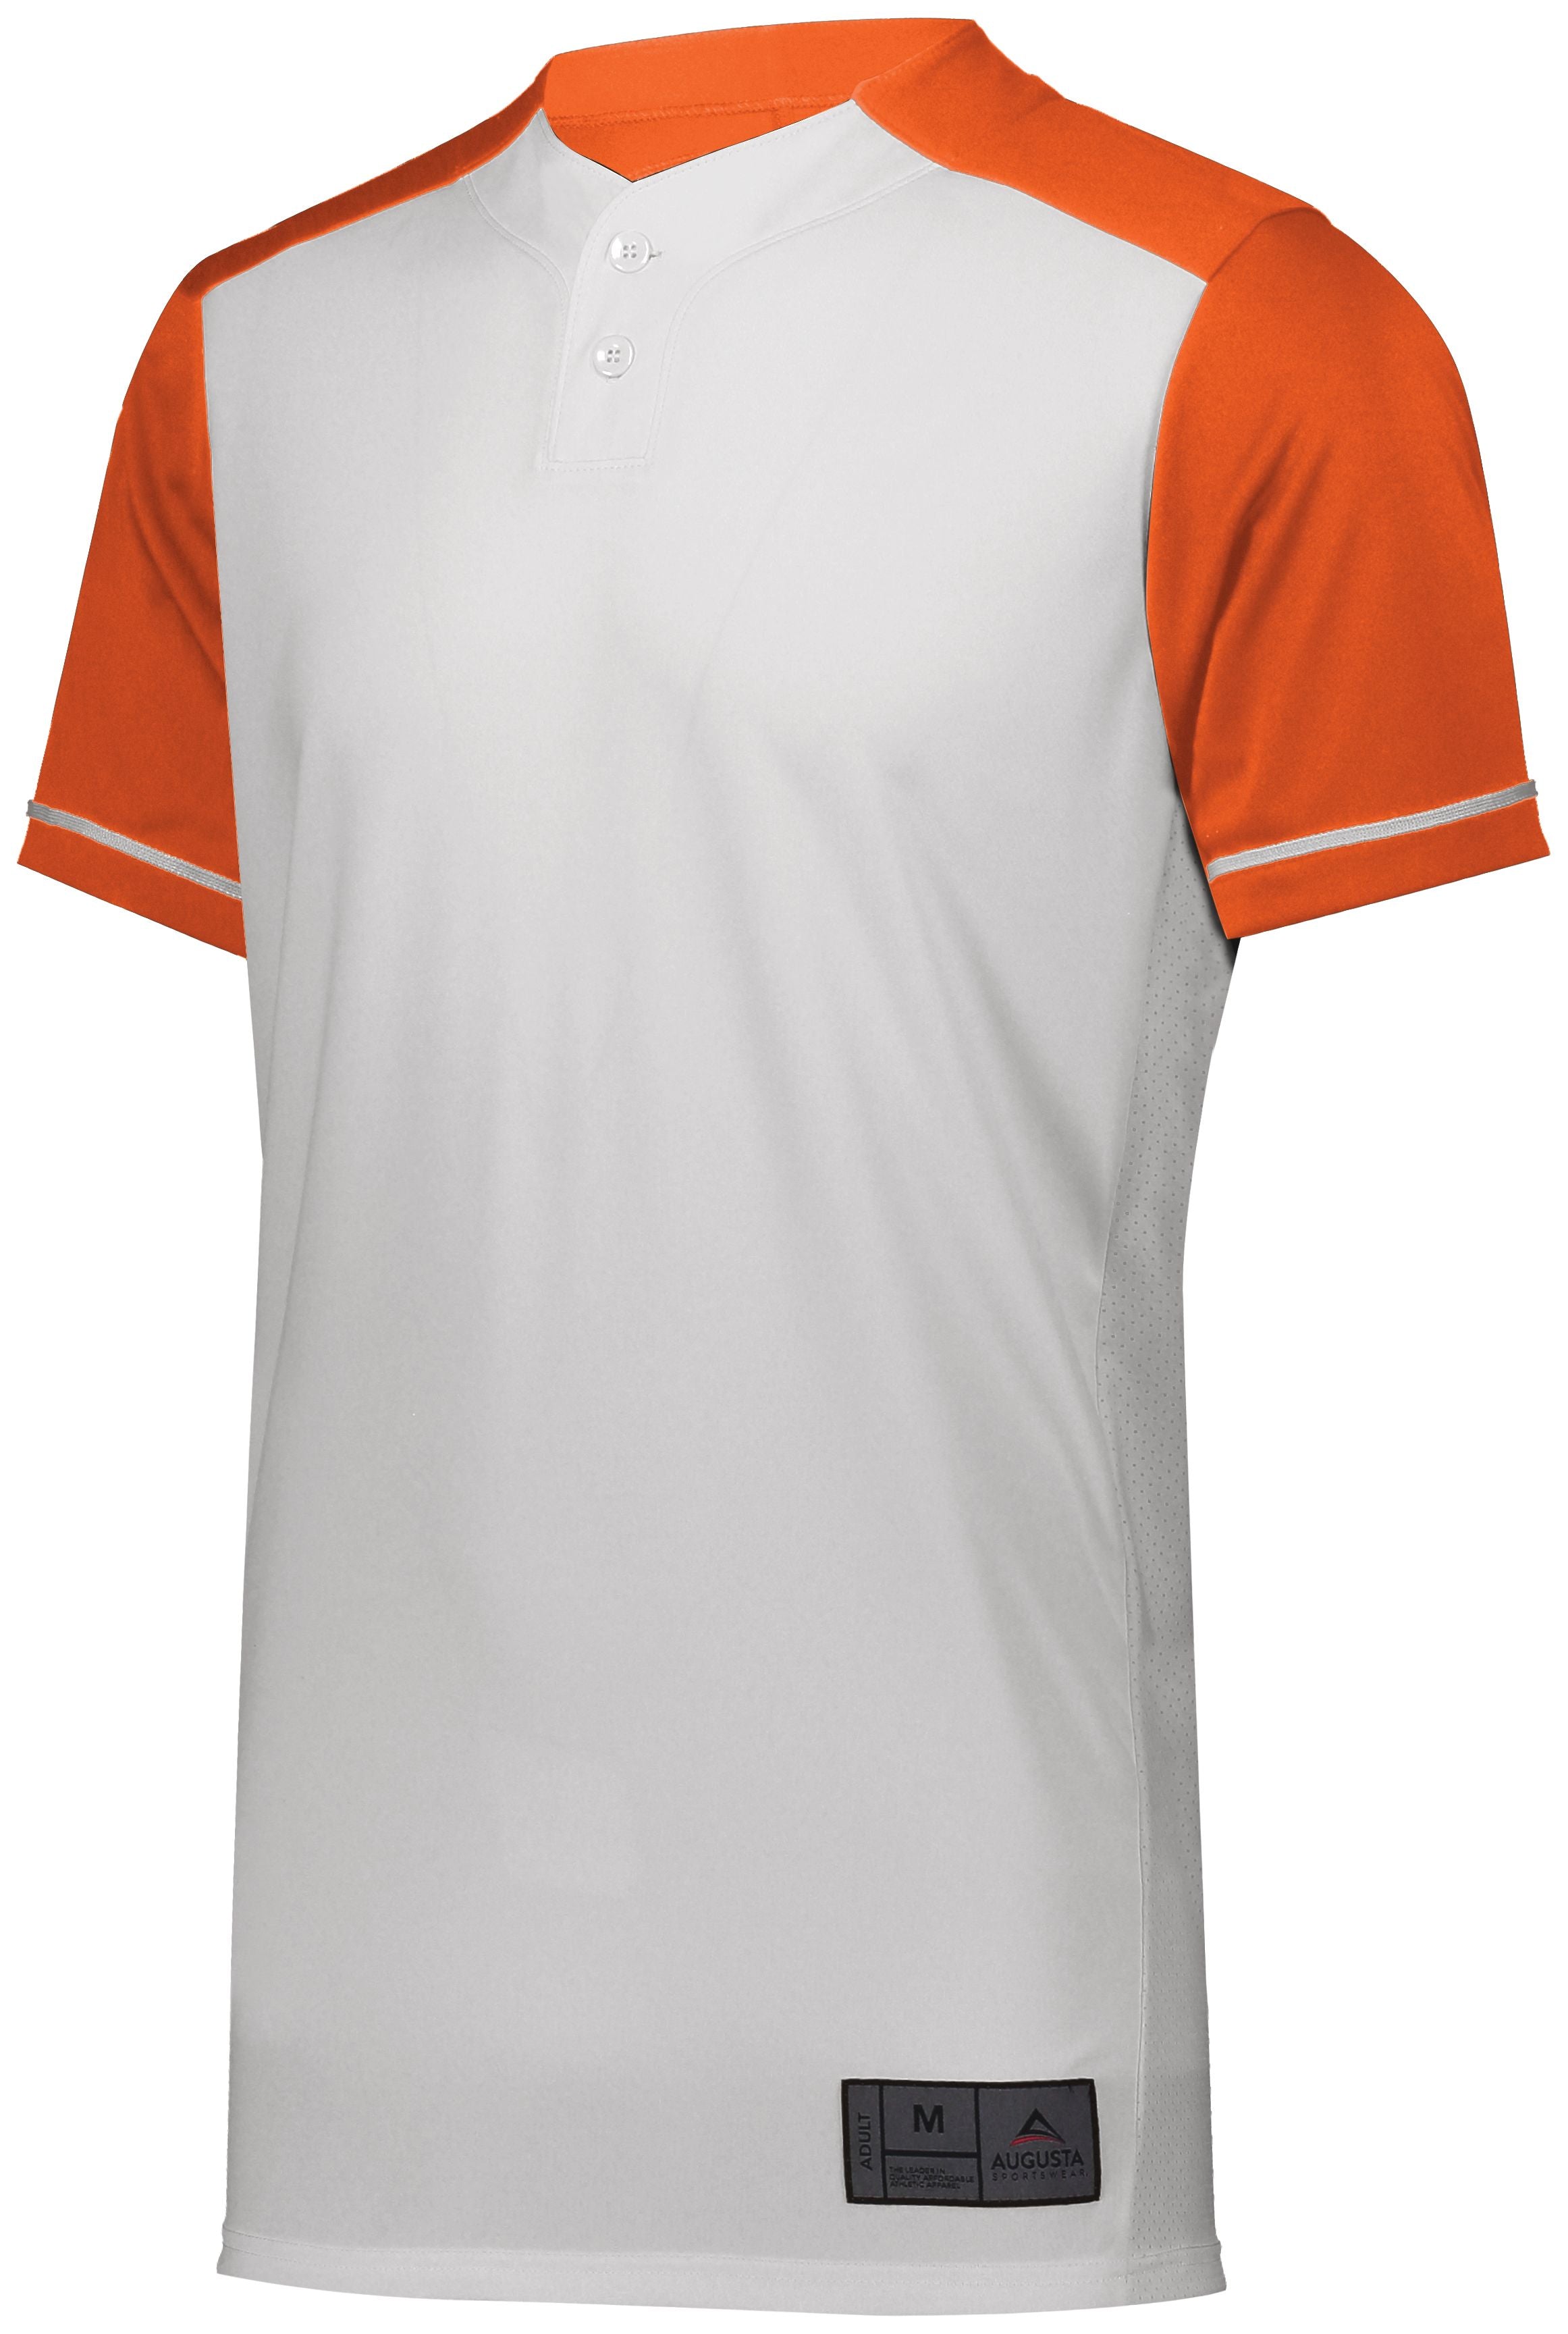 Augusta Sportswear Closer Jersey in White/Orange  -Part of the Adult, Adult-Jersey, Augusta-Products, Baseball, Shirts, All-Sports, All-Sports-1 product lines at KanaleyCreations.com